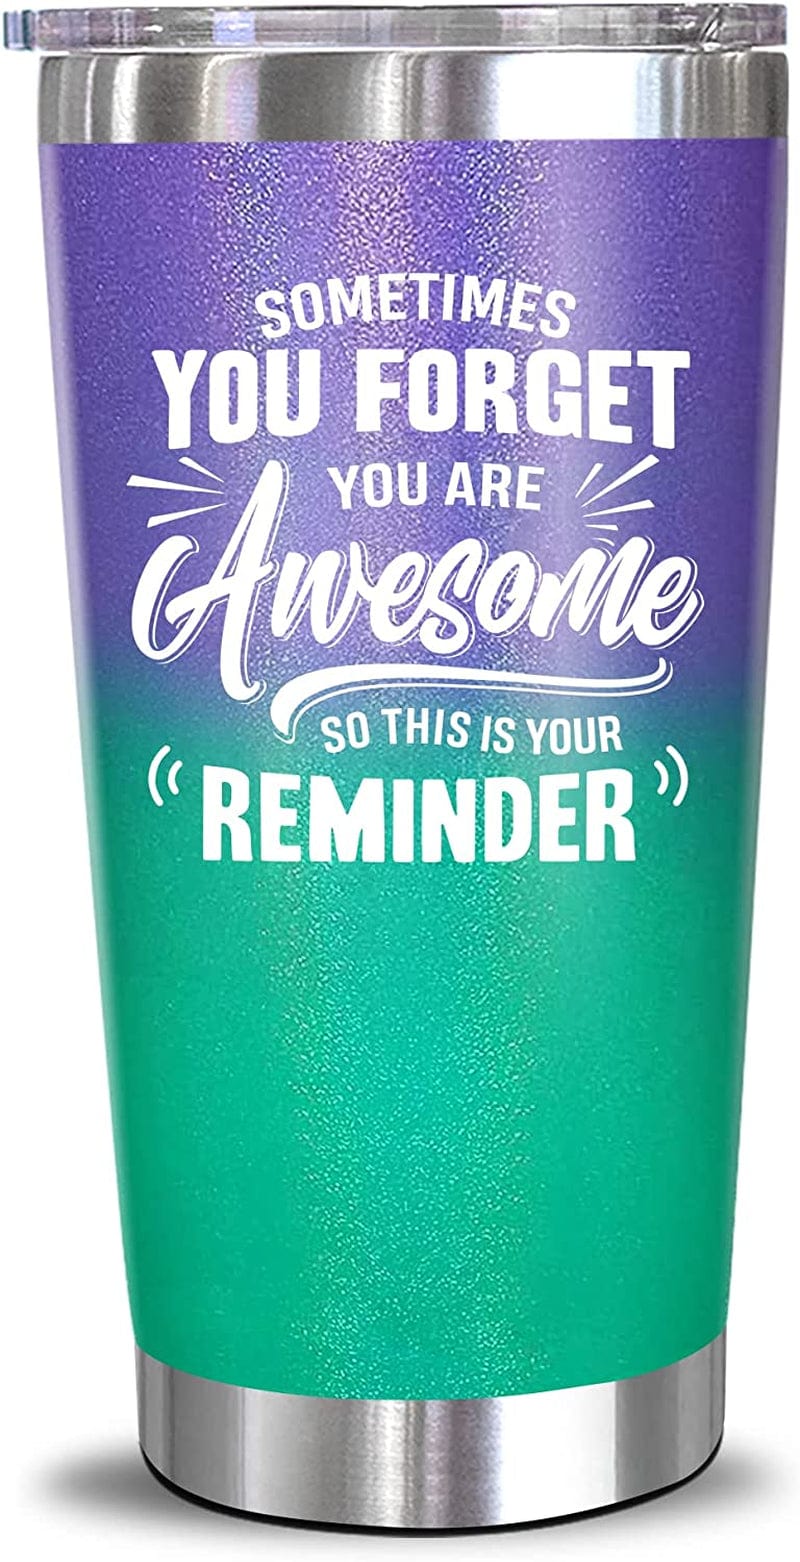 Christmas Gifts for Men, Women - Birthday Gifts, Thank You Gifts, Inspirational Gifts for Men, Women, Mom, Dad, Wife, Husband, Best Friend, Sister, Brother, Her, Him, Coworker, Employee - 20Oz Tumbler